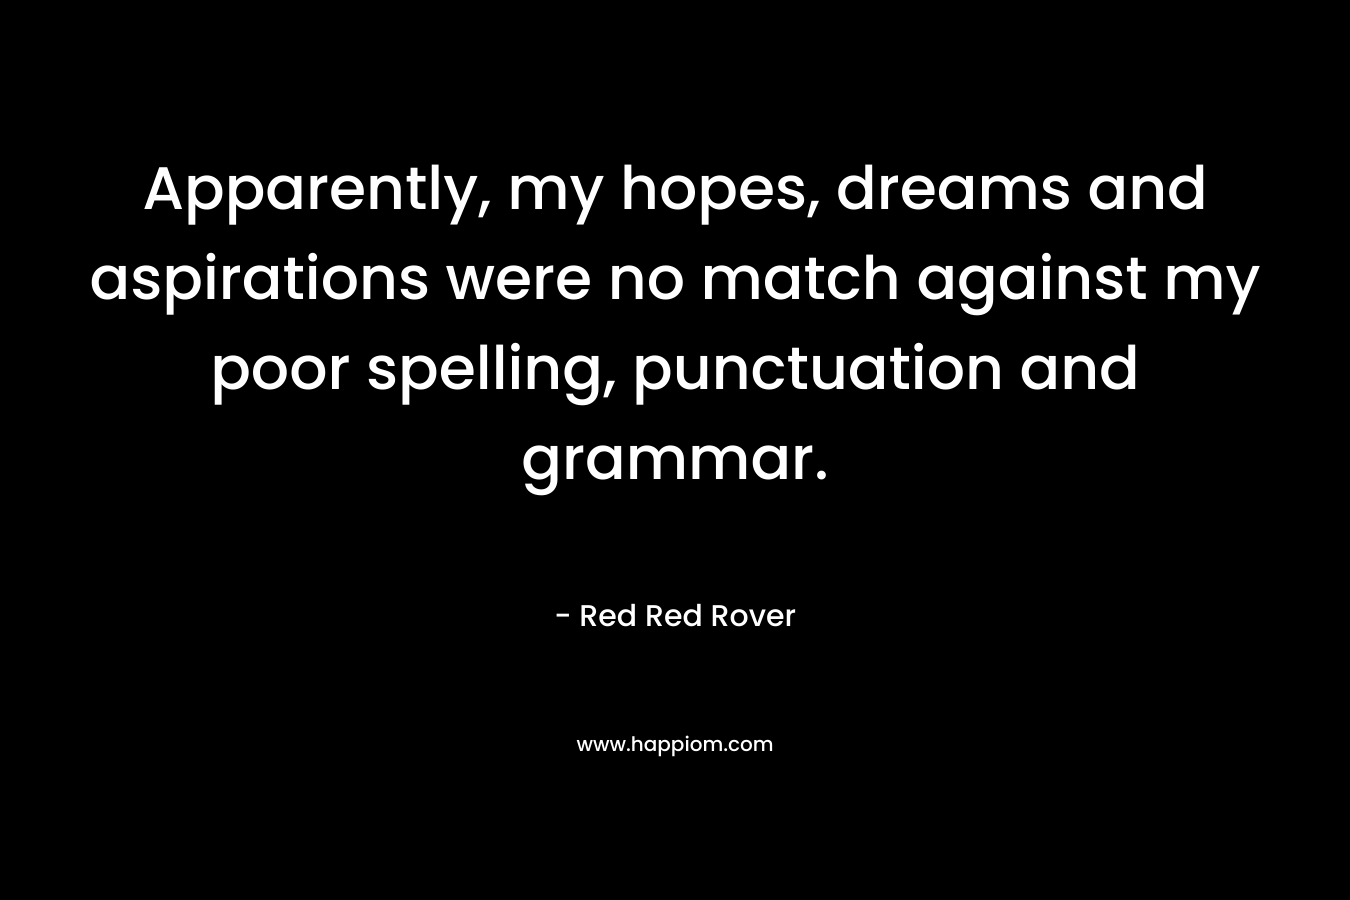 Apparently, my hopes, dreams and aspirations were no match against my poor spelling, punctuation and grammar. – Red Red Rover